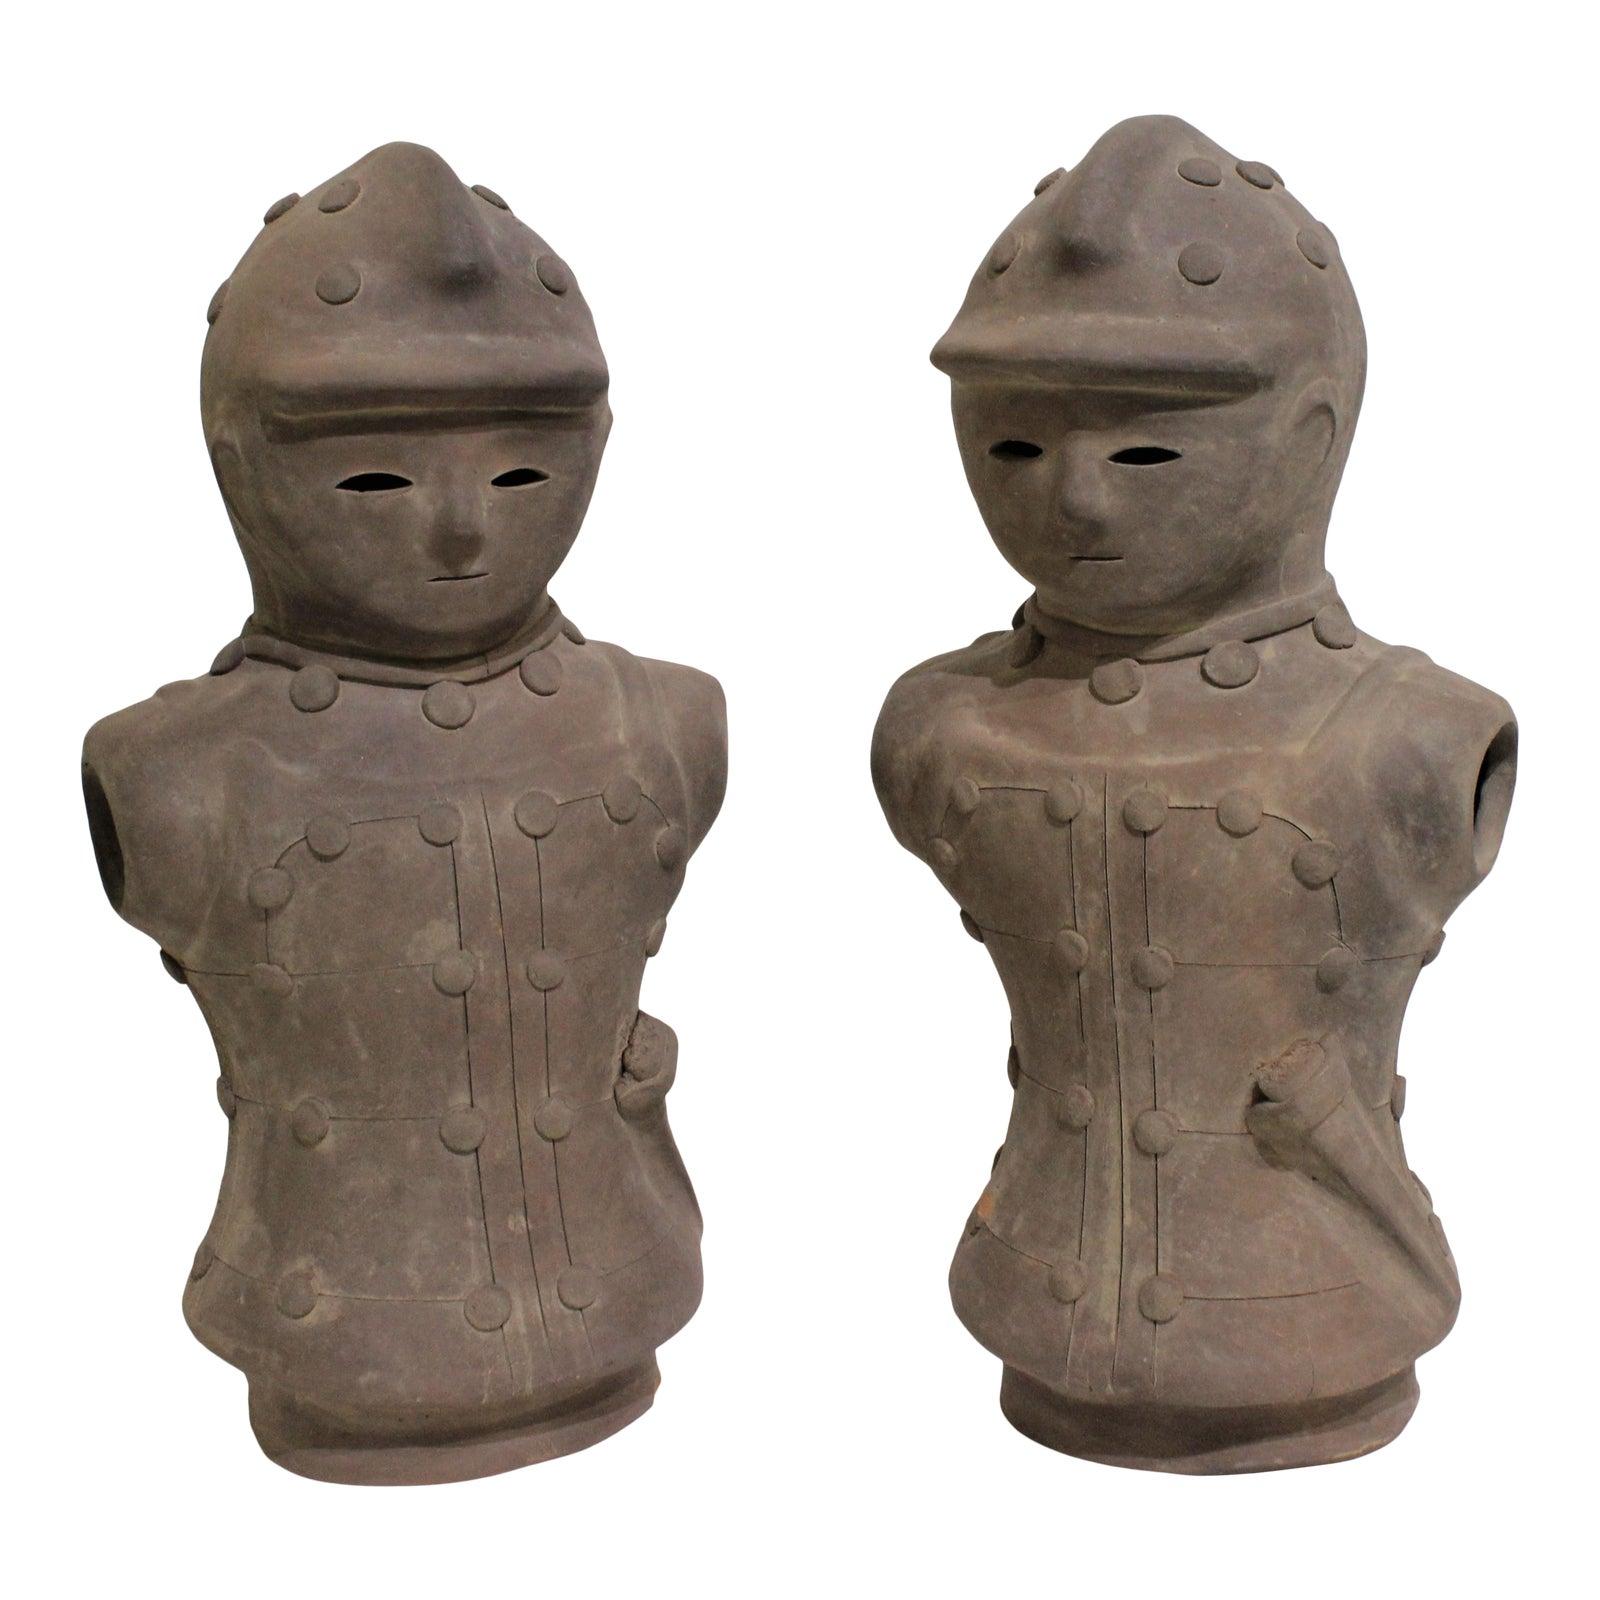 What is a Haniwa horse?